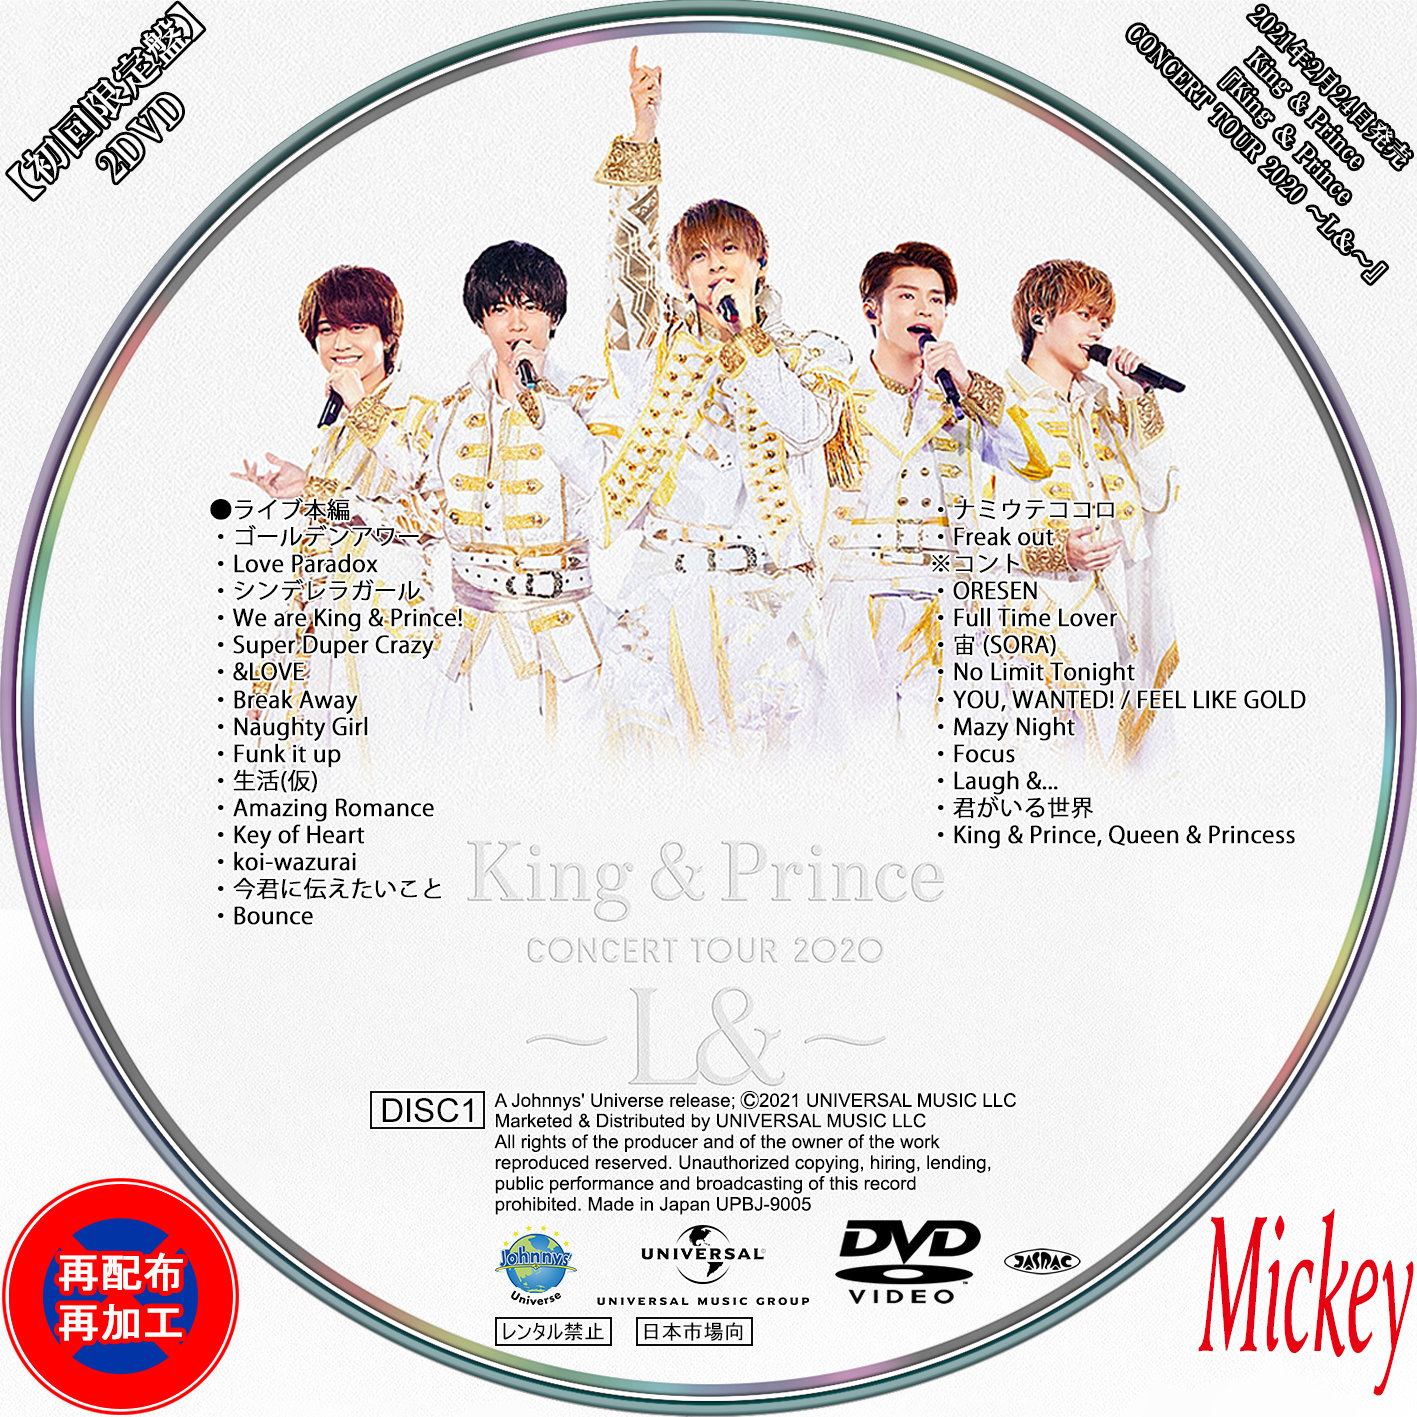 King&amp;Prince 「Mr.5」「made in」 4点セット - DVD/ブルーレイ